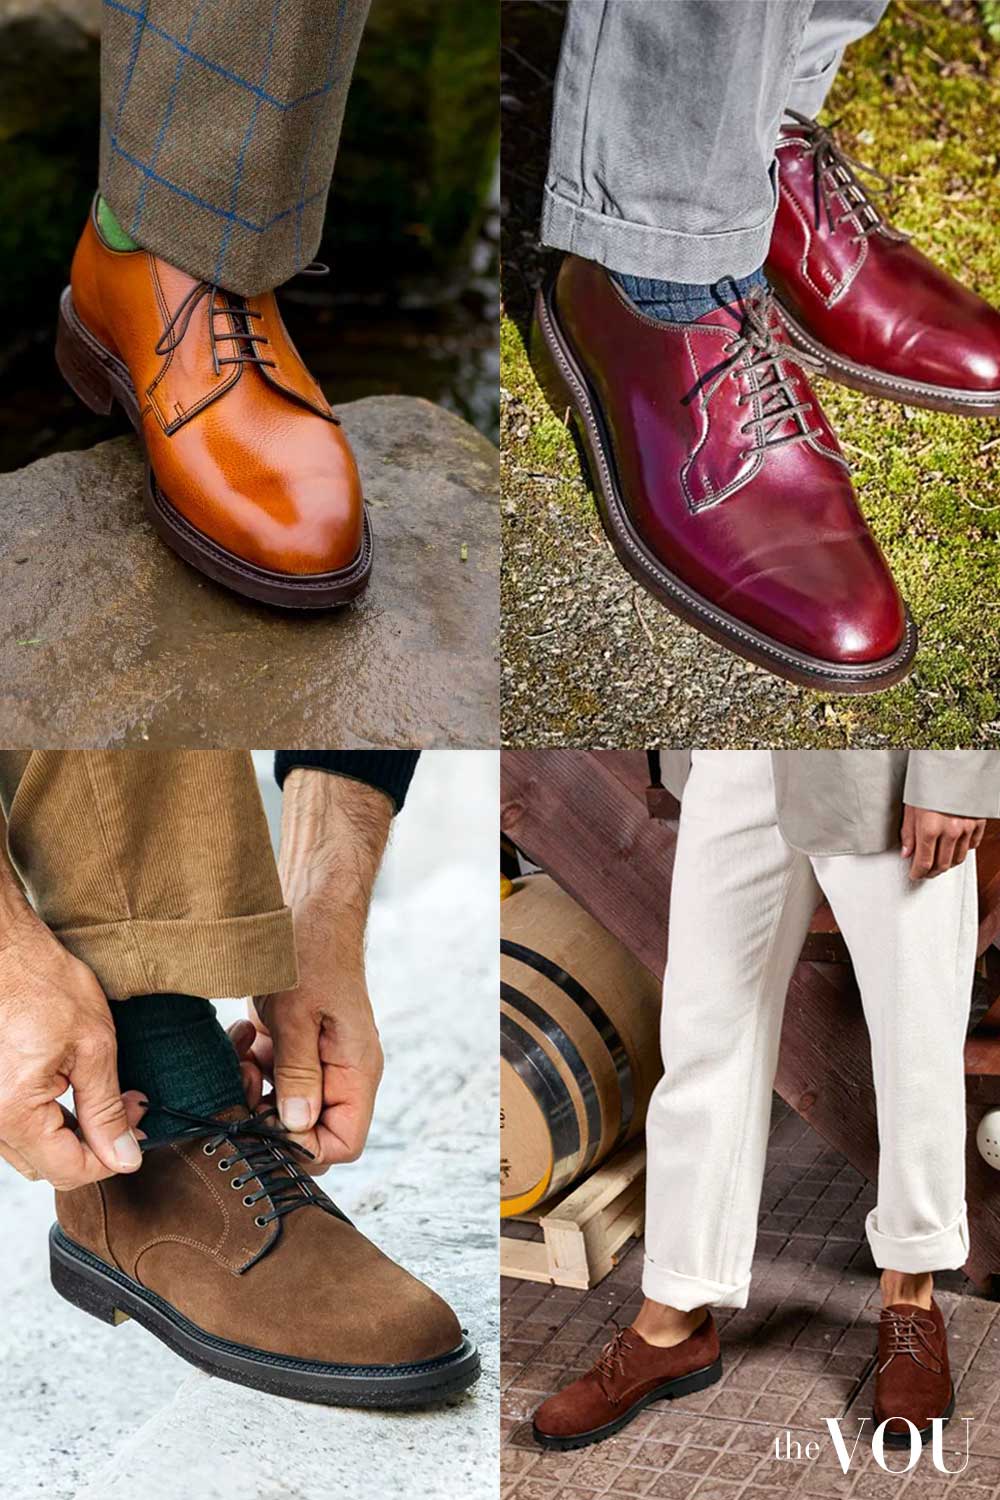 Business casual Old Money style derby shoes